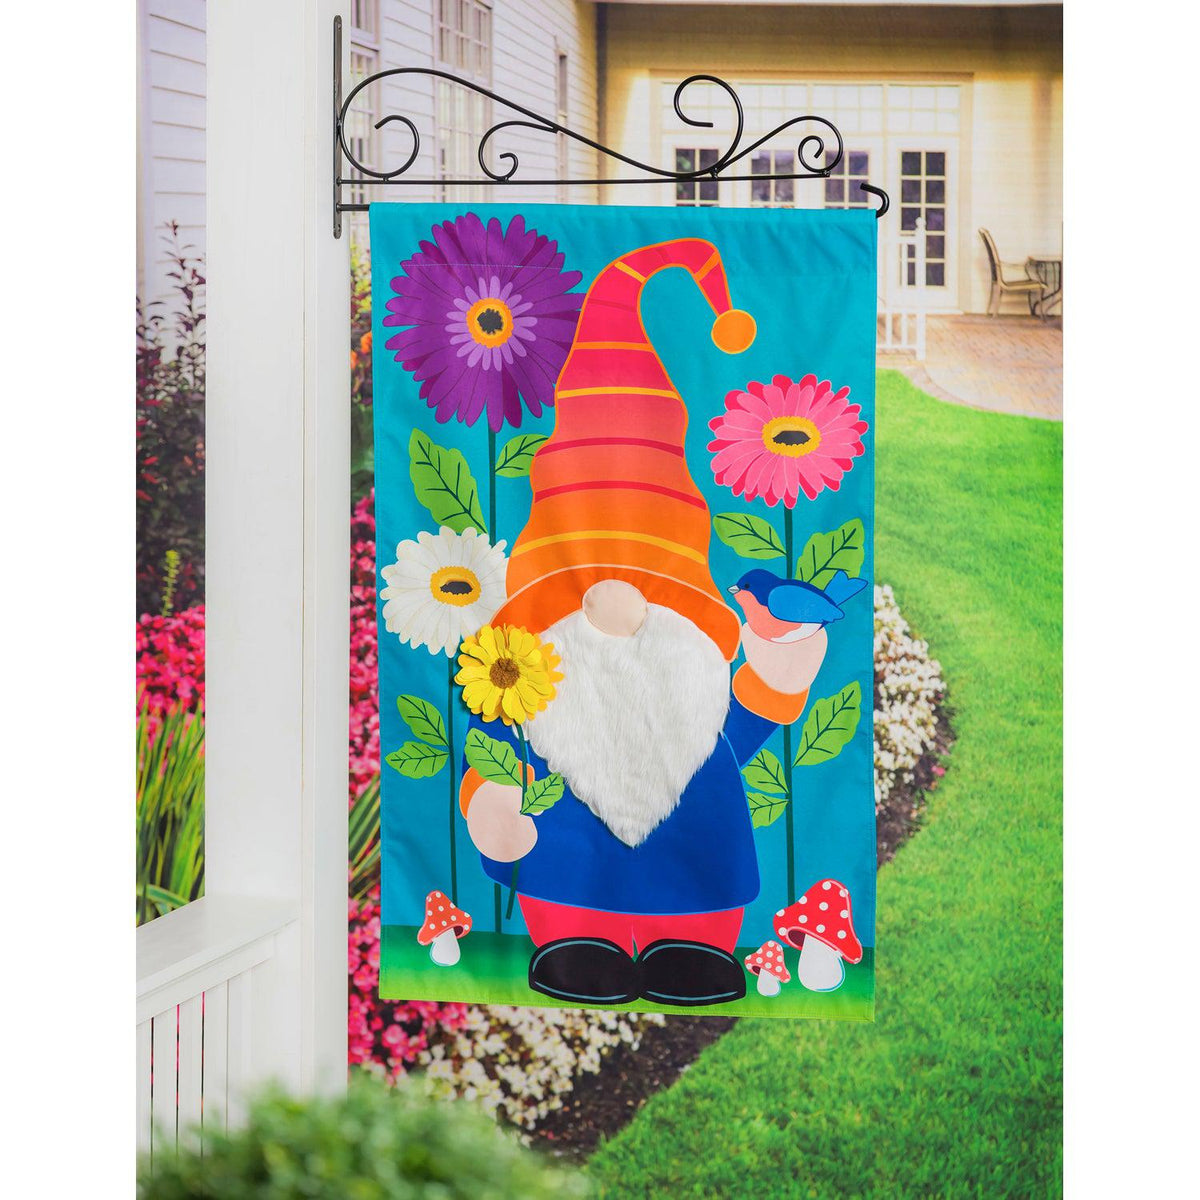 The brightly colored Garden Gnome house banner features a charming gnome standing among flowers while holding a flower and a bluebird. 